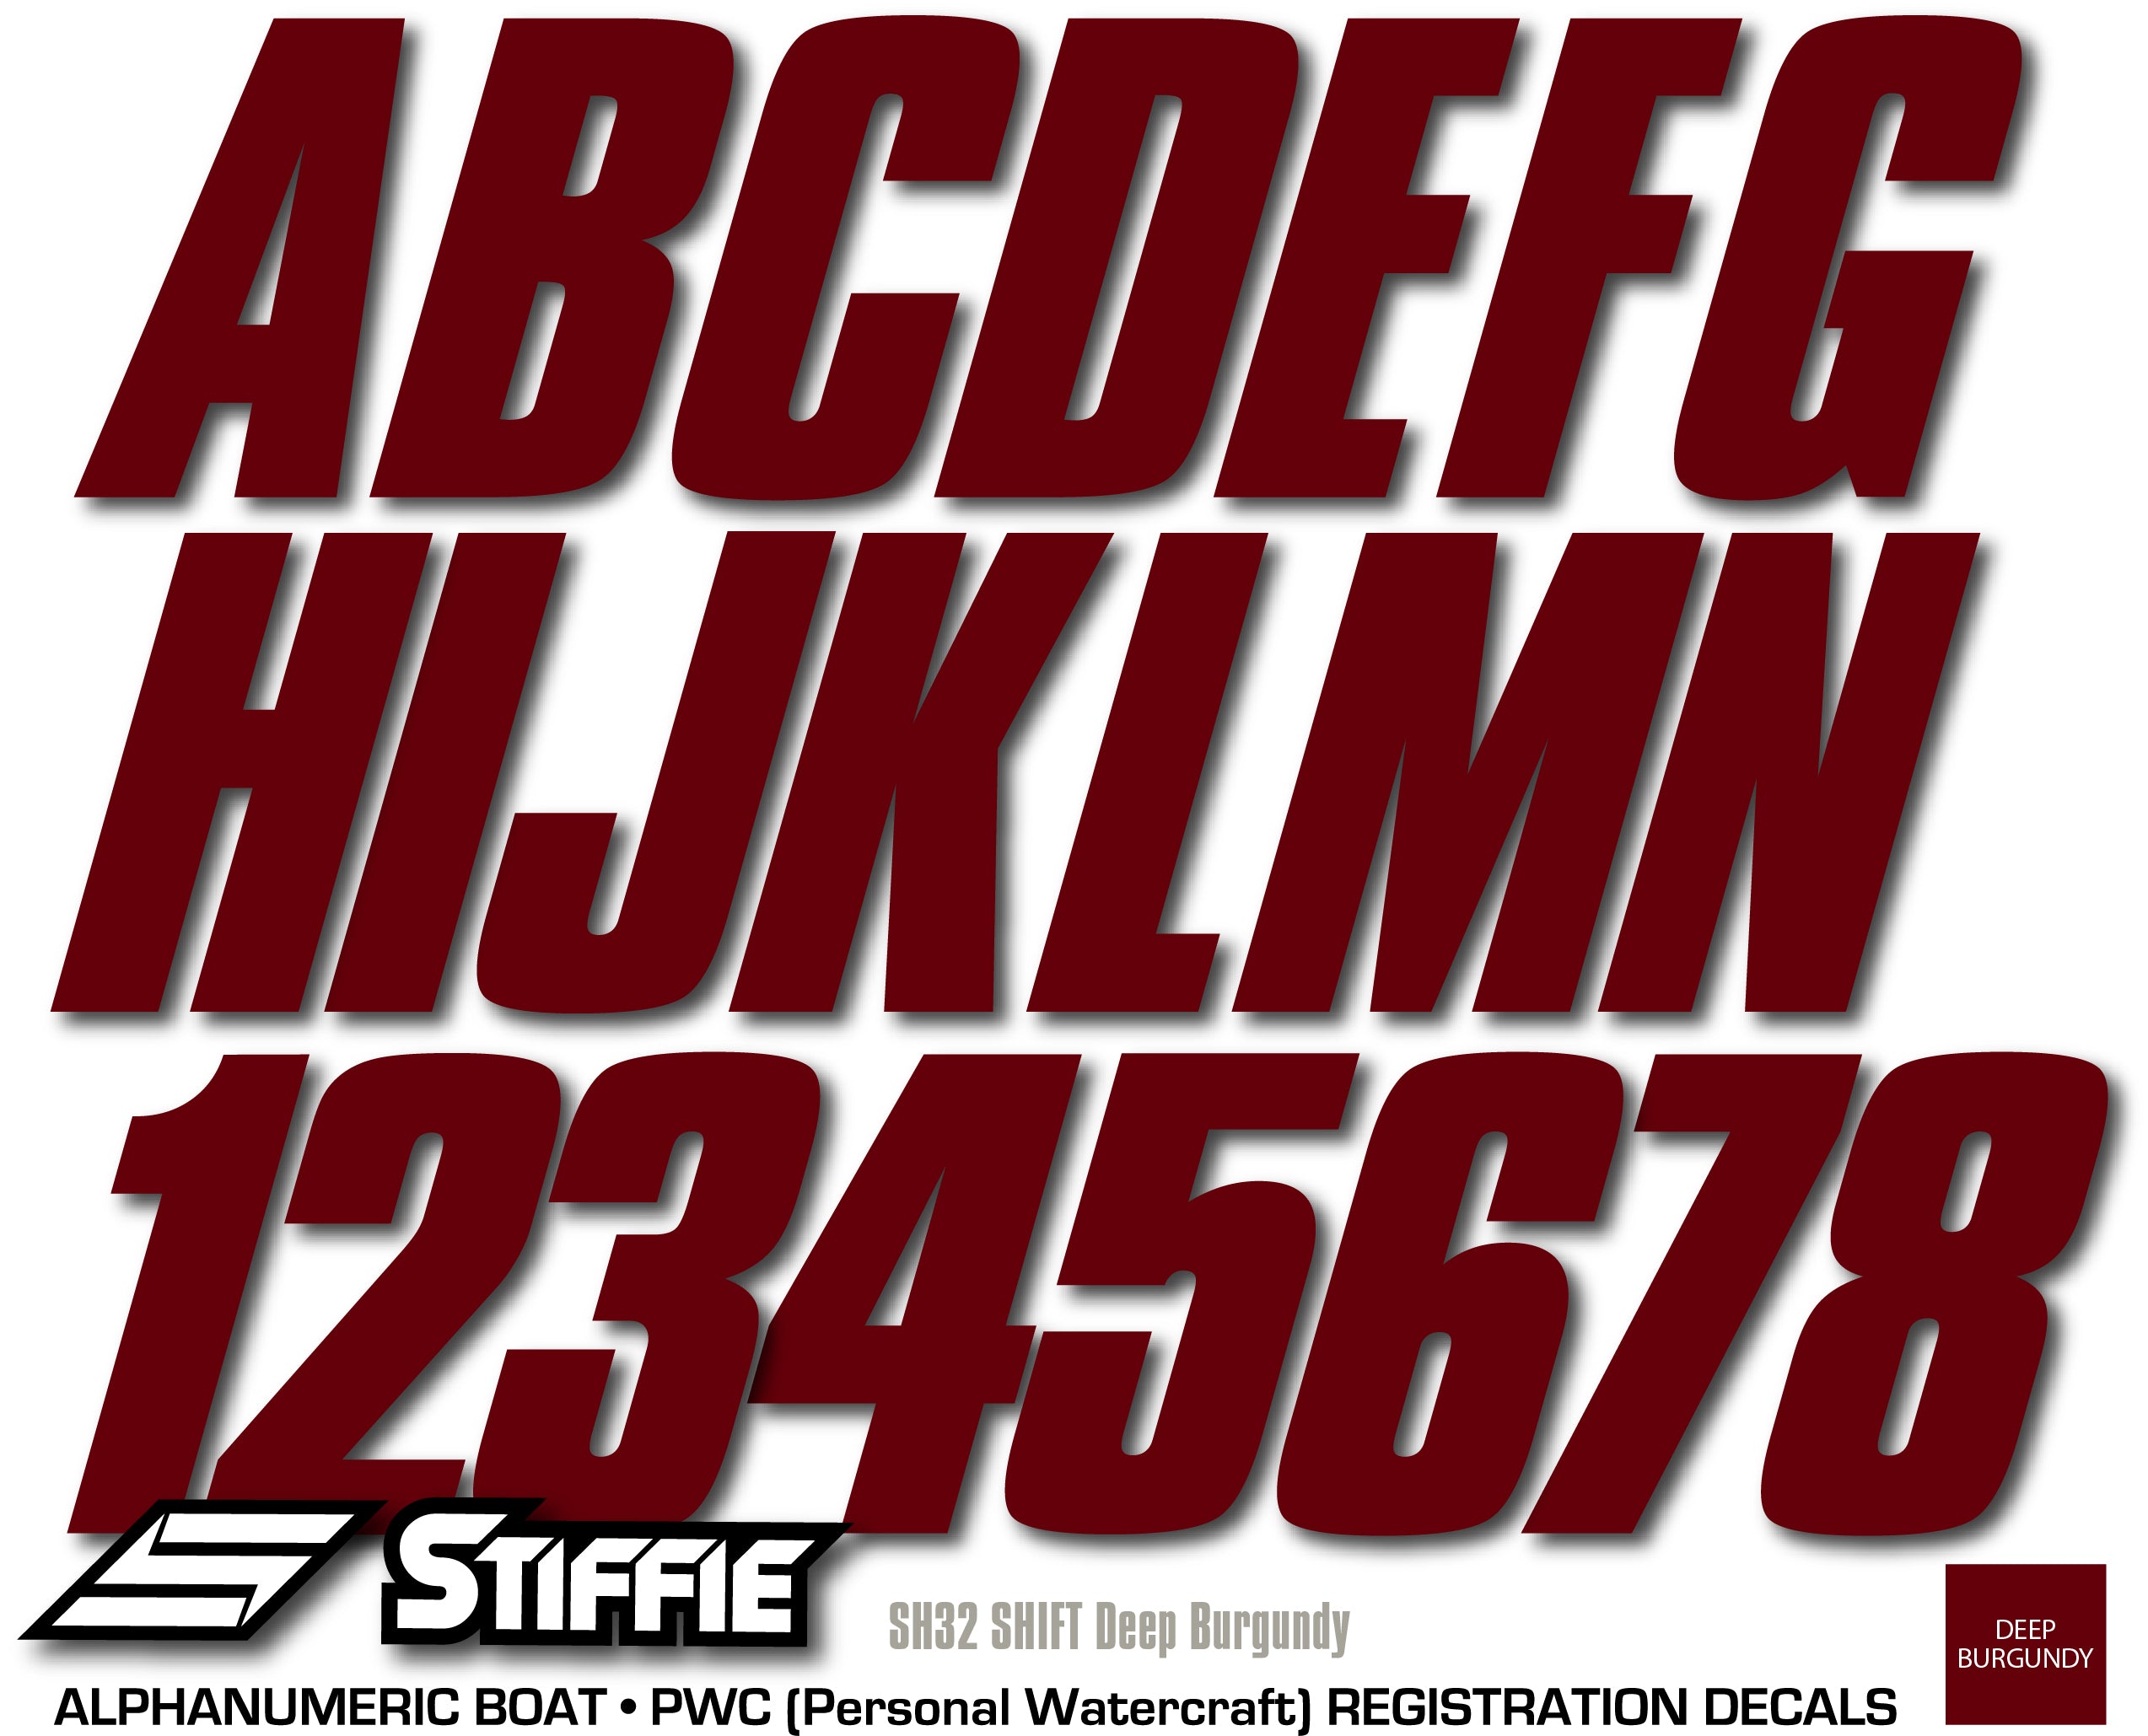 STIFFIE Shift Deep Burgundy 3" ID Kit Alpha-Numeric Registration Identification Numbers Stickers Decals for Boats & Personal Watercraft